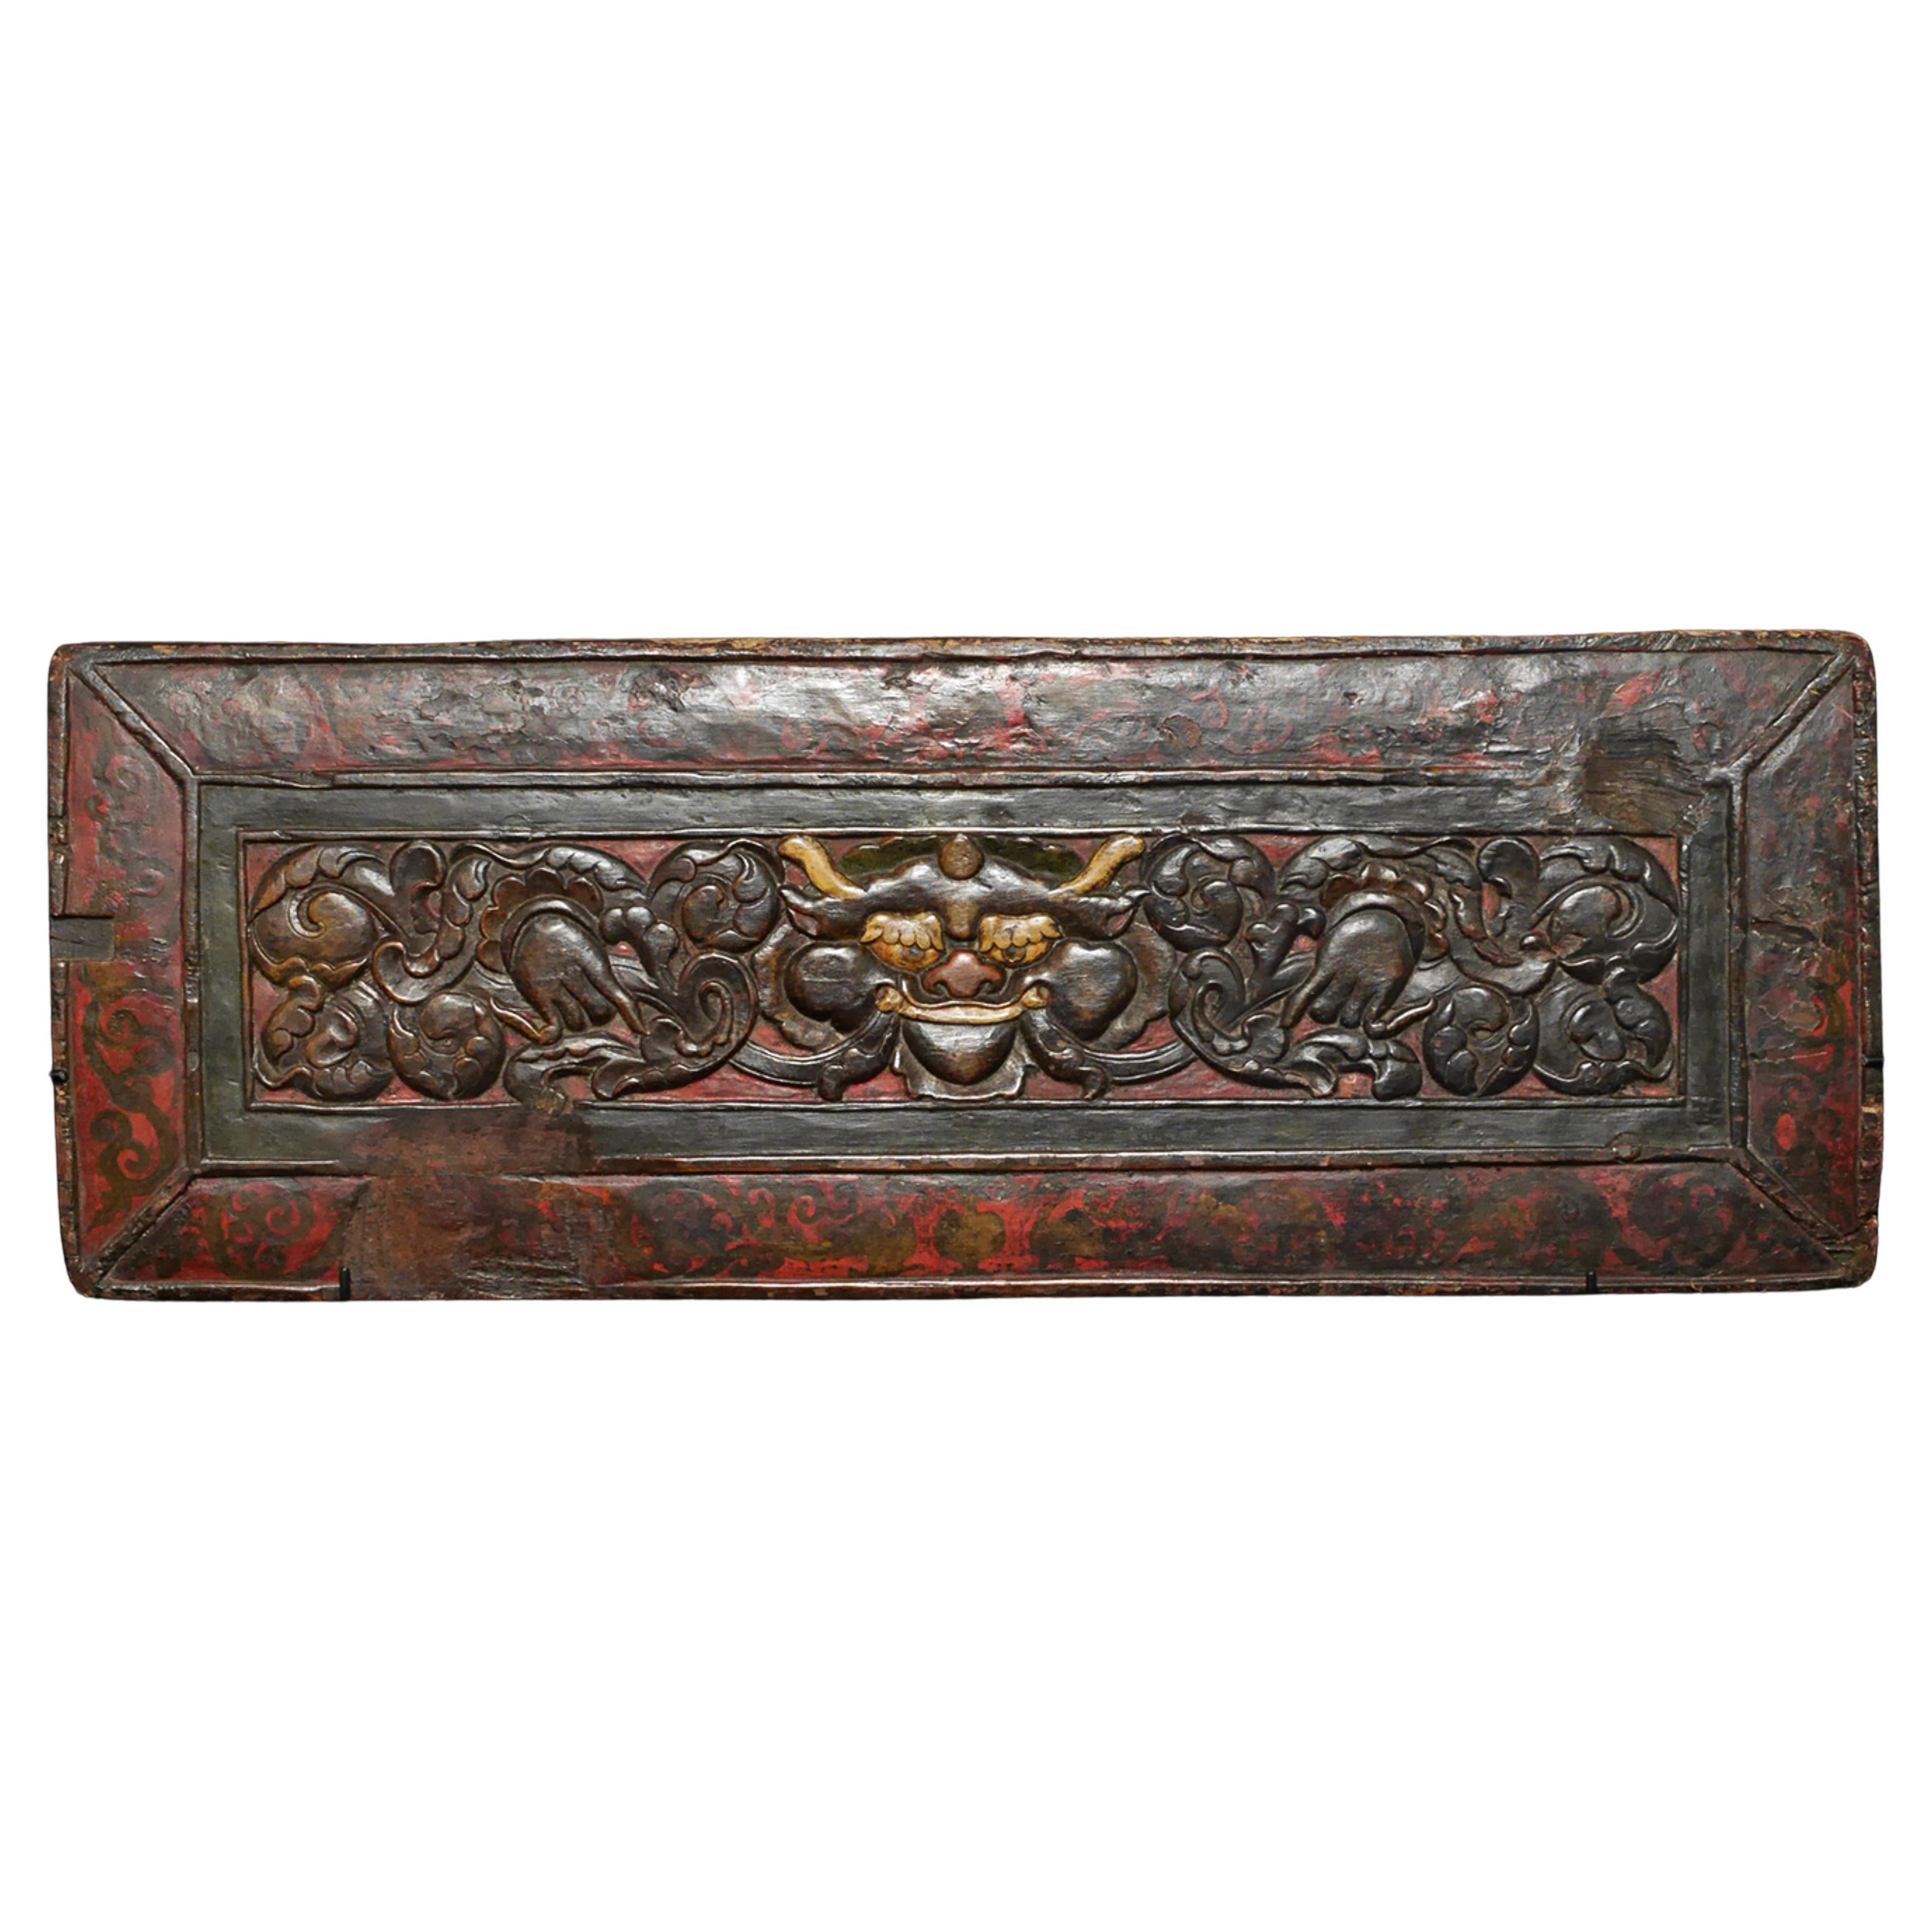 14thC Tibetan Book Cover. Superb example- Unique Early Tibet Relic For Sale